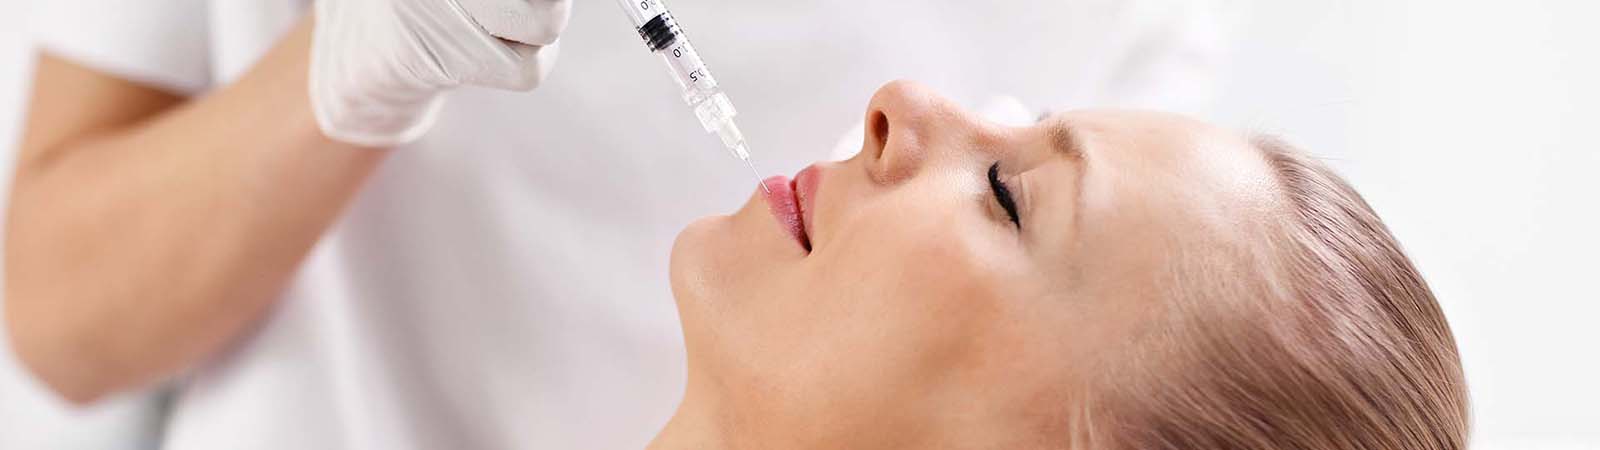 Do And Don’ts After Botox Treatment